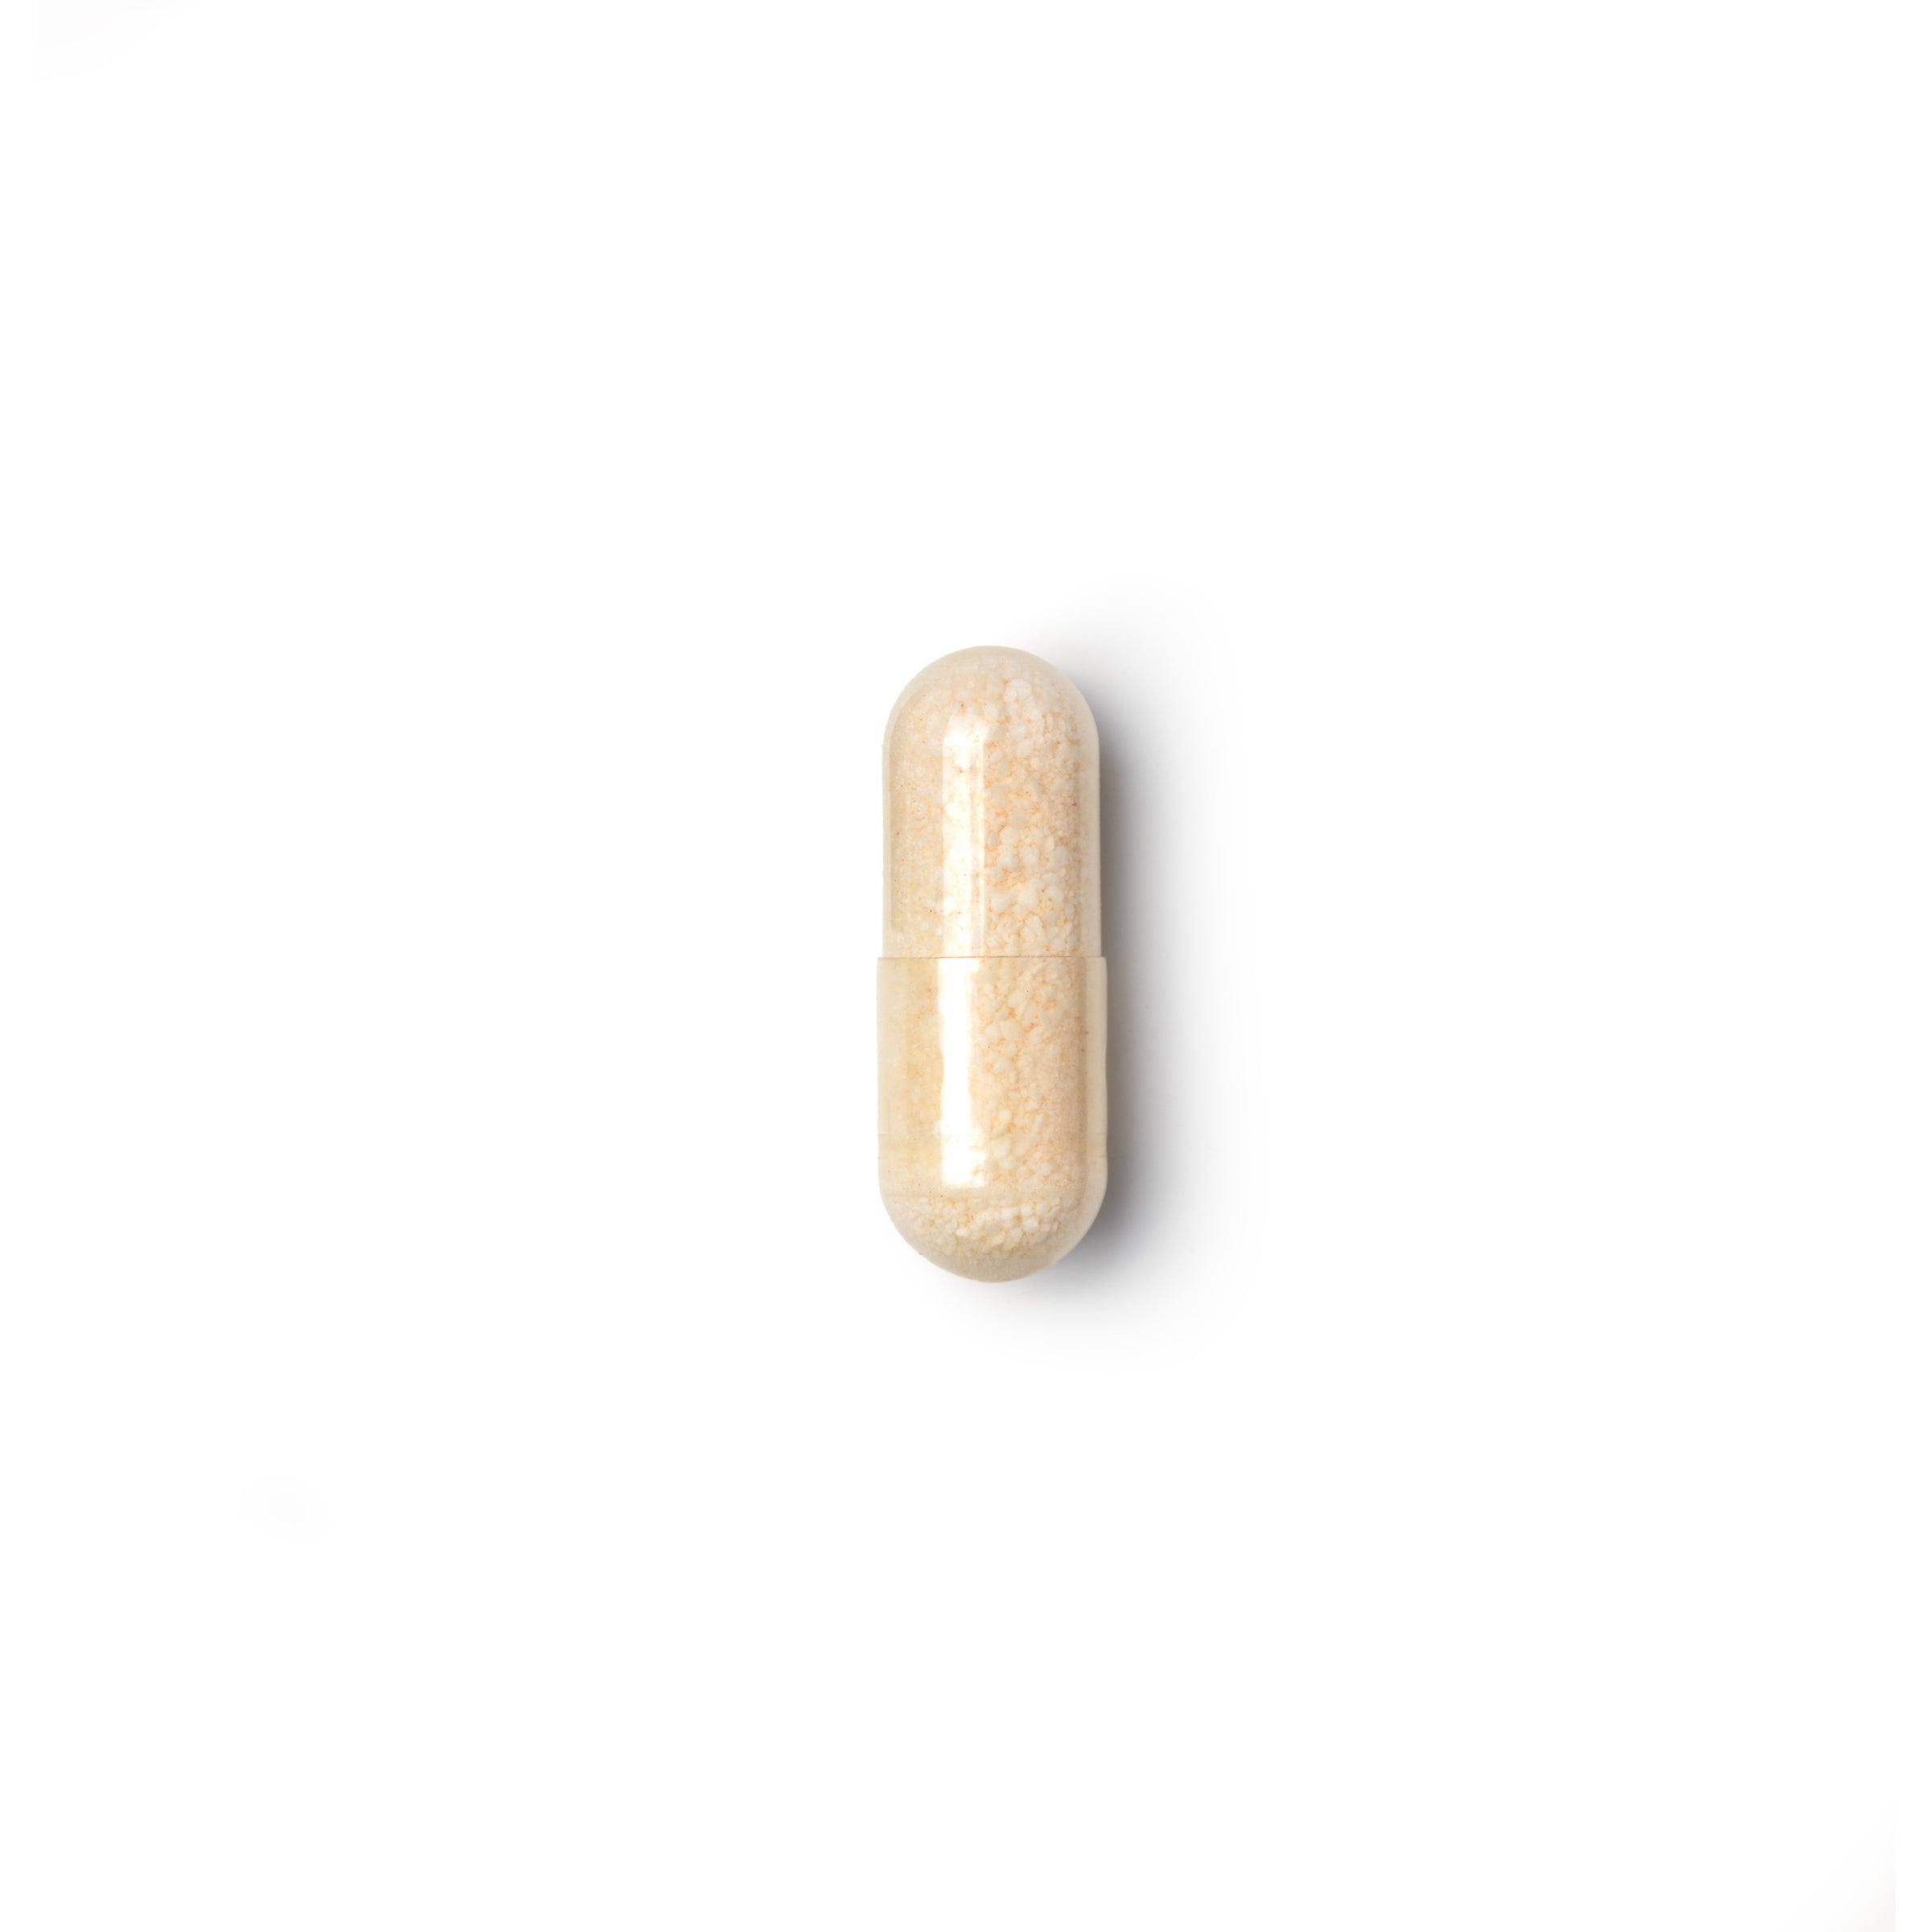 Ethical Nutrients Clinical Nervalgesic Capsule